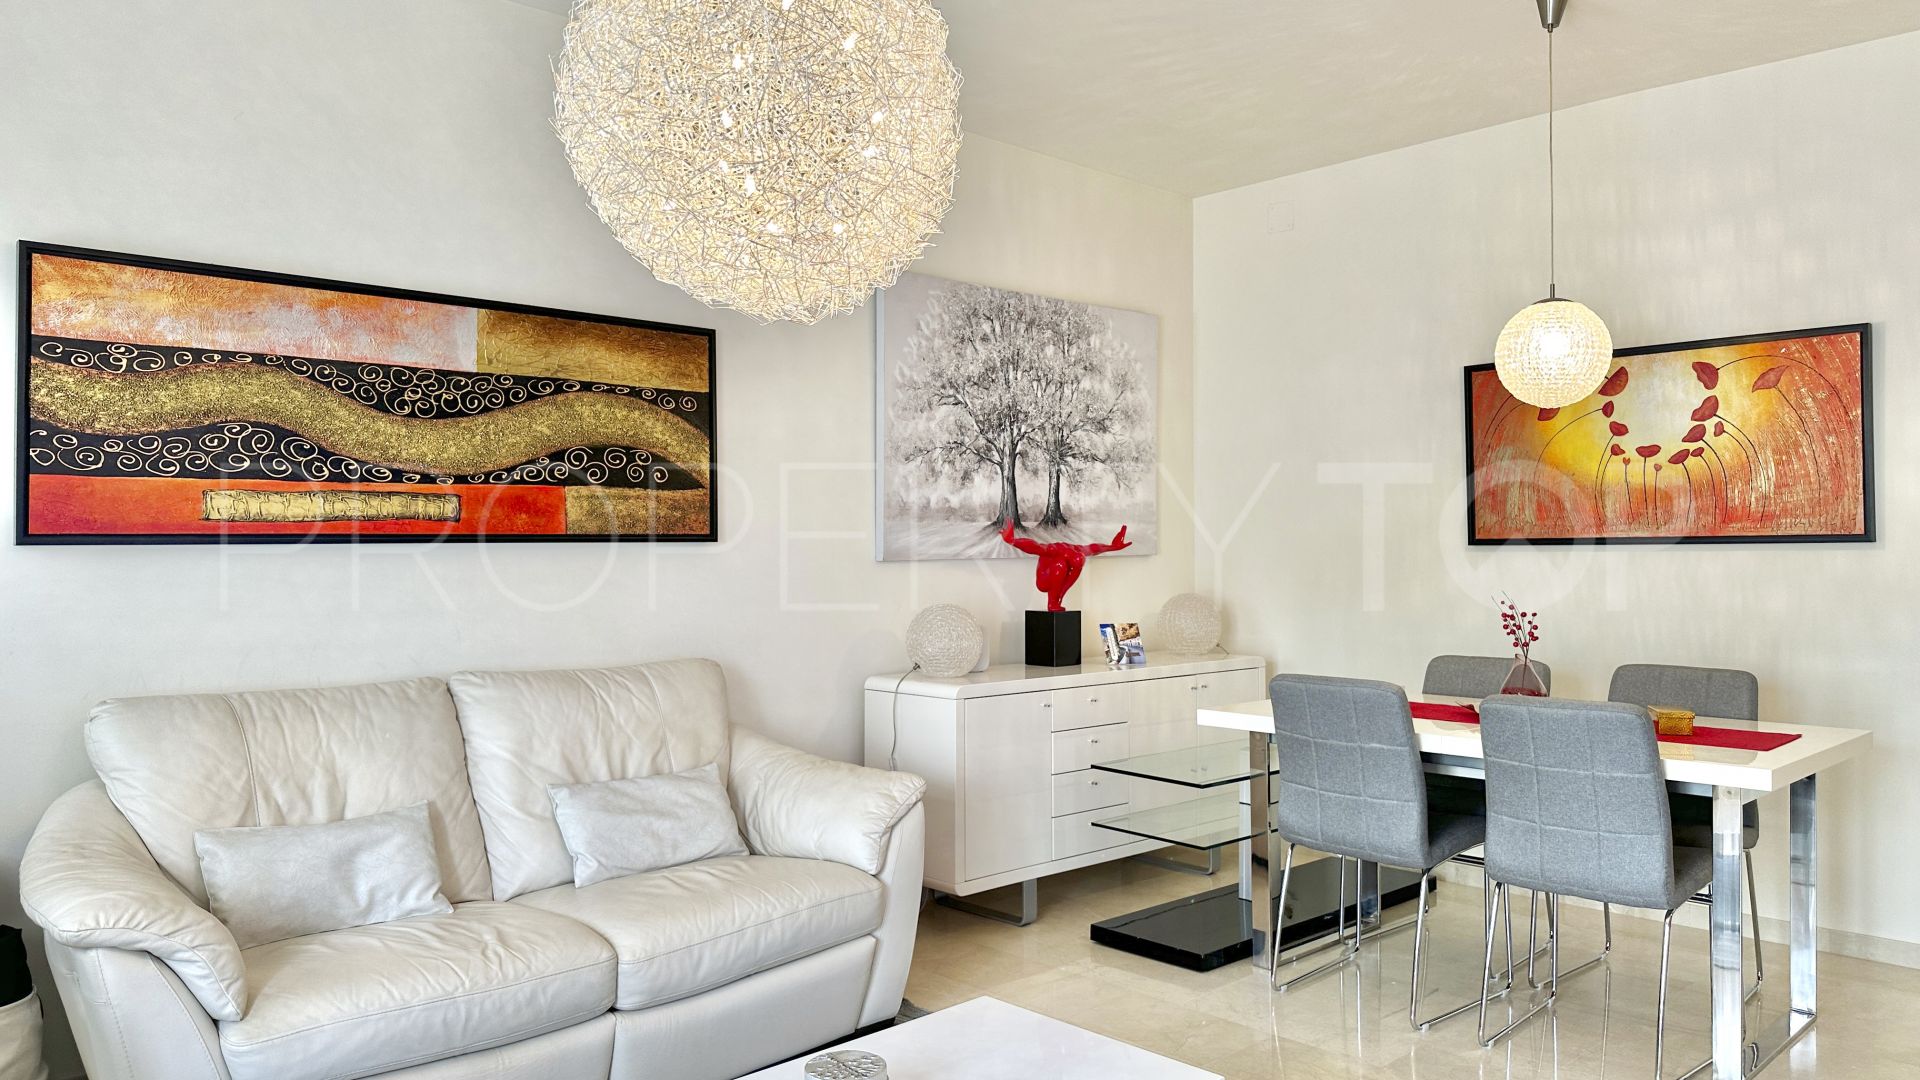 Buy Valle Romano flat with 3 bedrooms